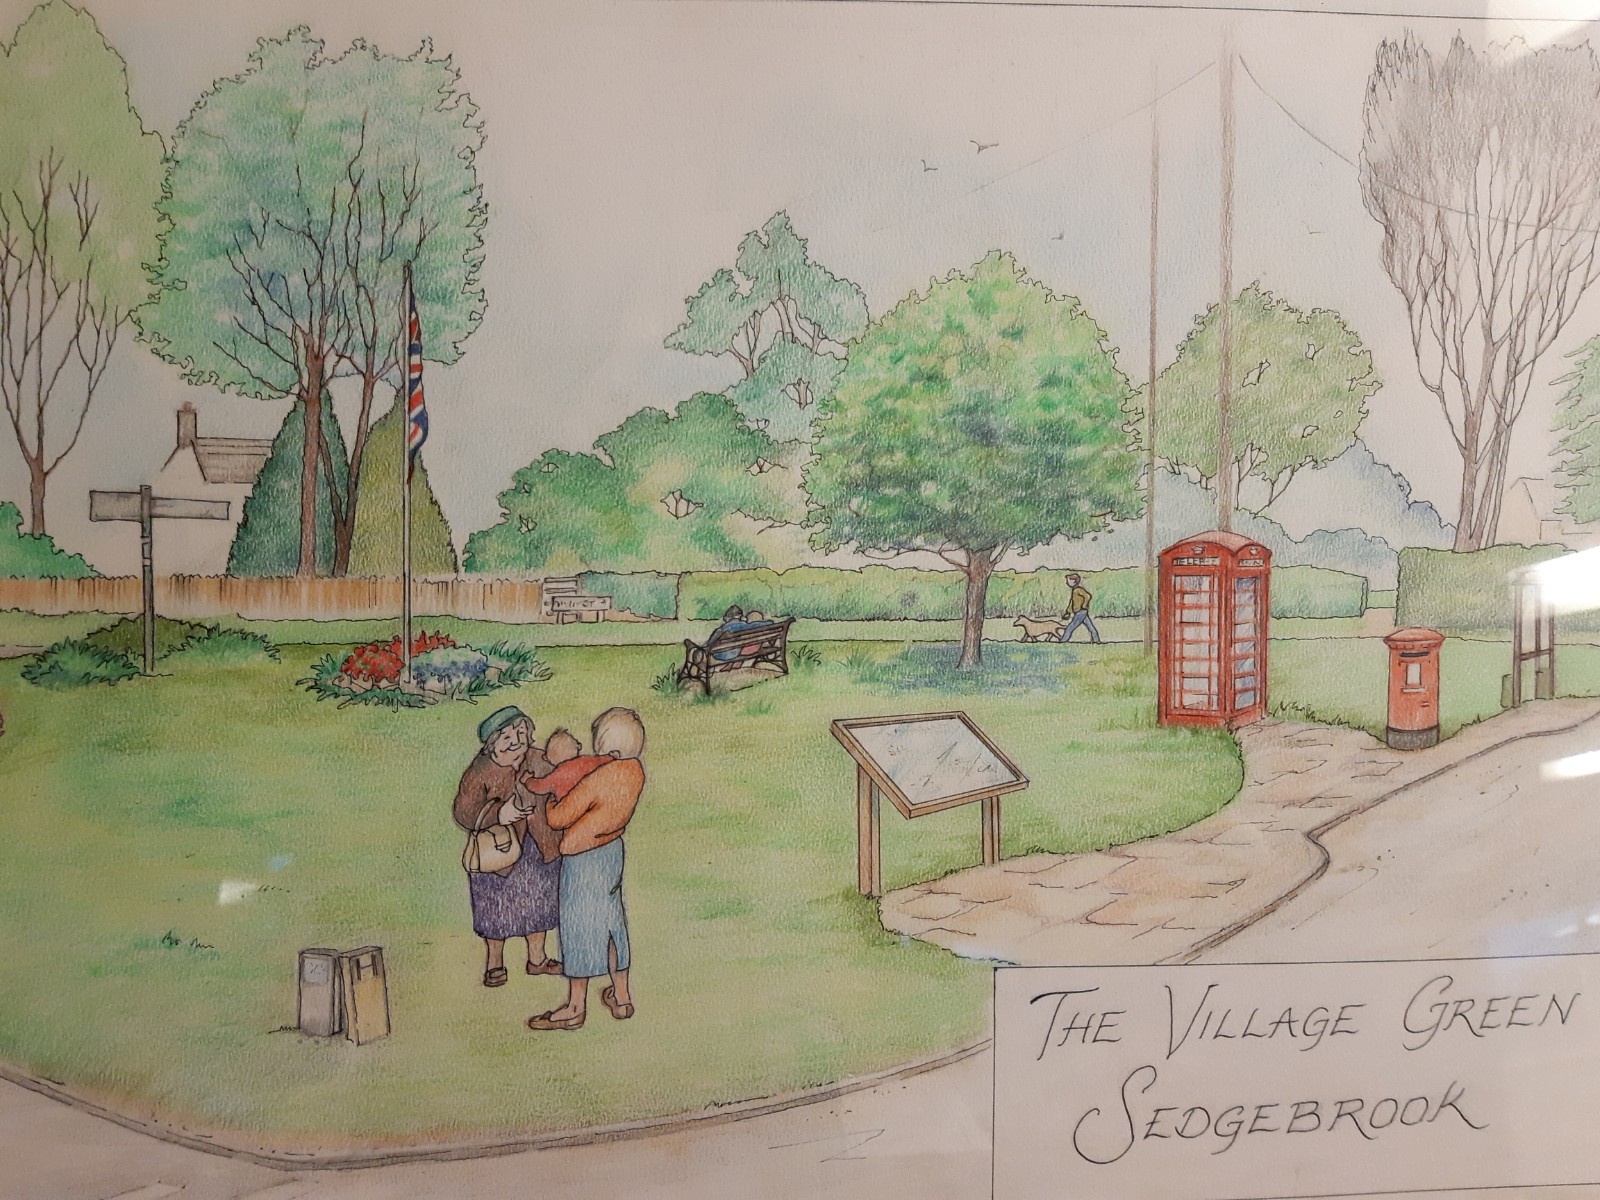 The Village Green from an Artist's Impression